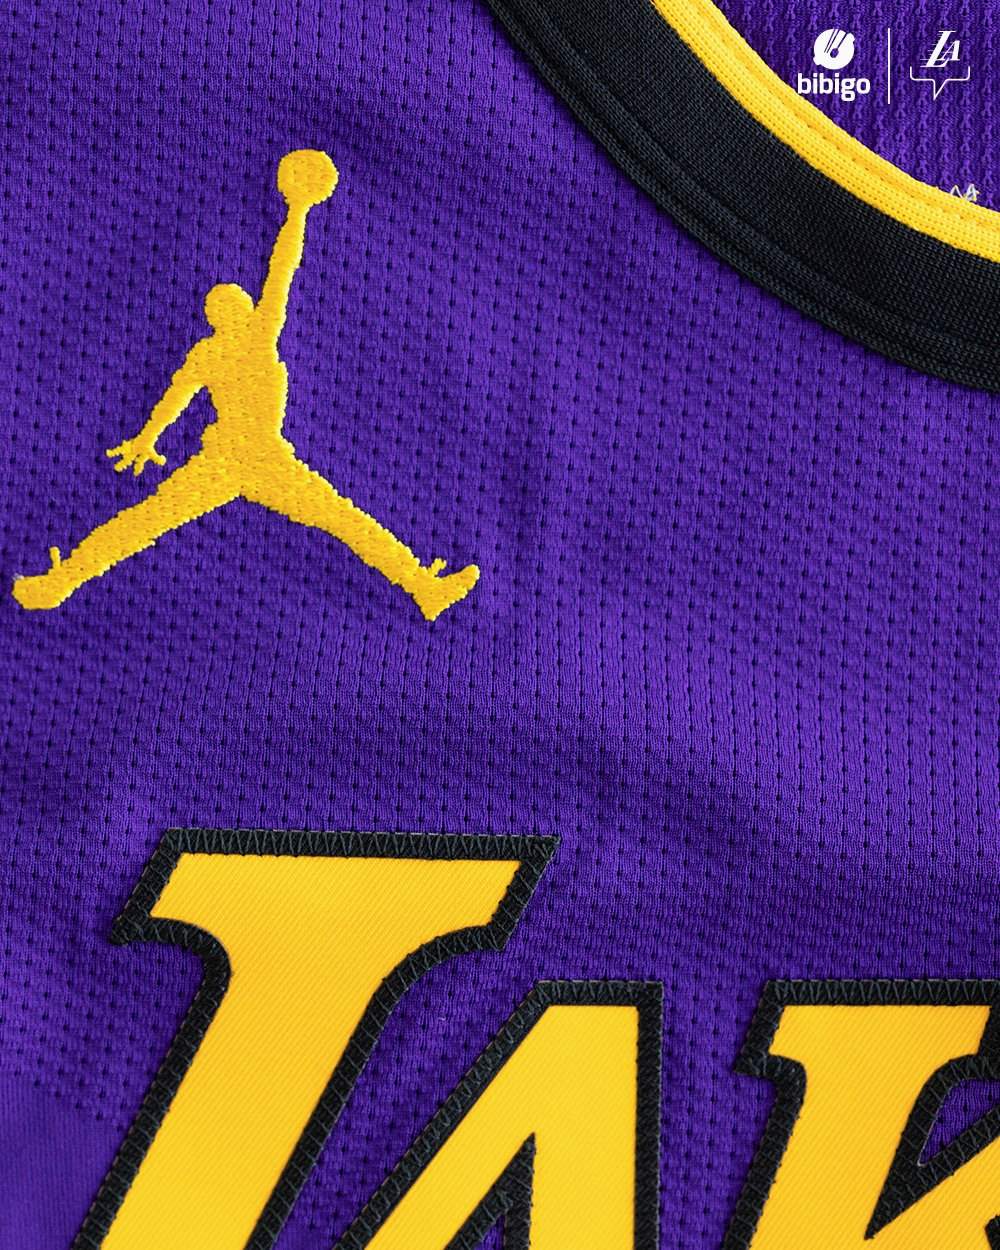 Los Angeles Lakers 22-23 Statement Jersey Revealed